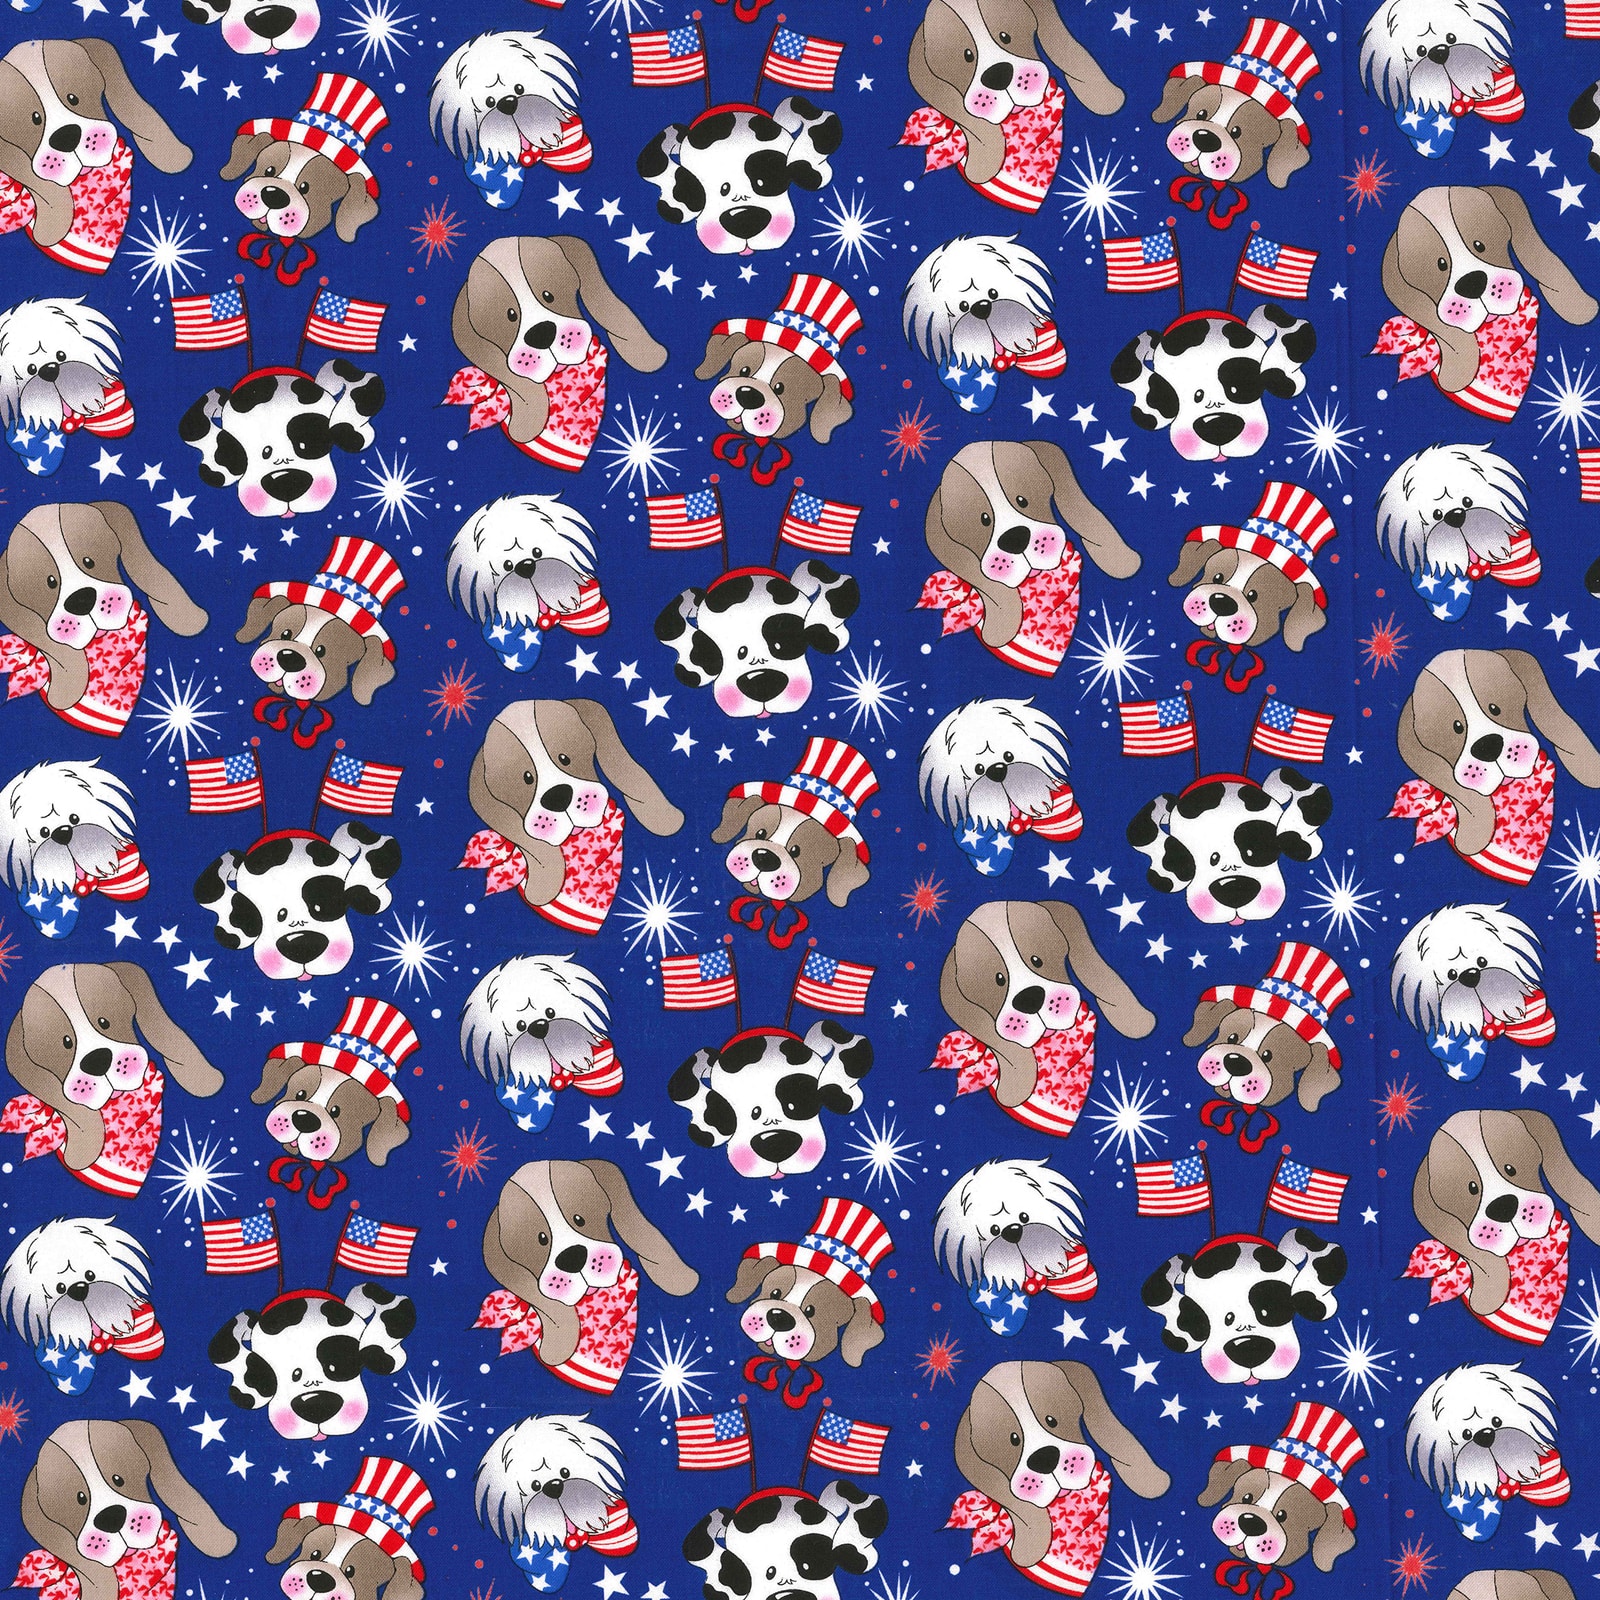 Fabric Traditions Blue Patriotic Pups Novelty Cotton Fabric